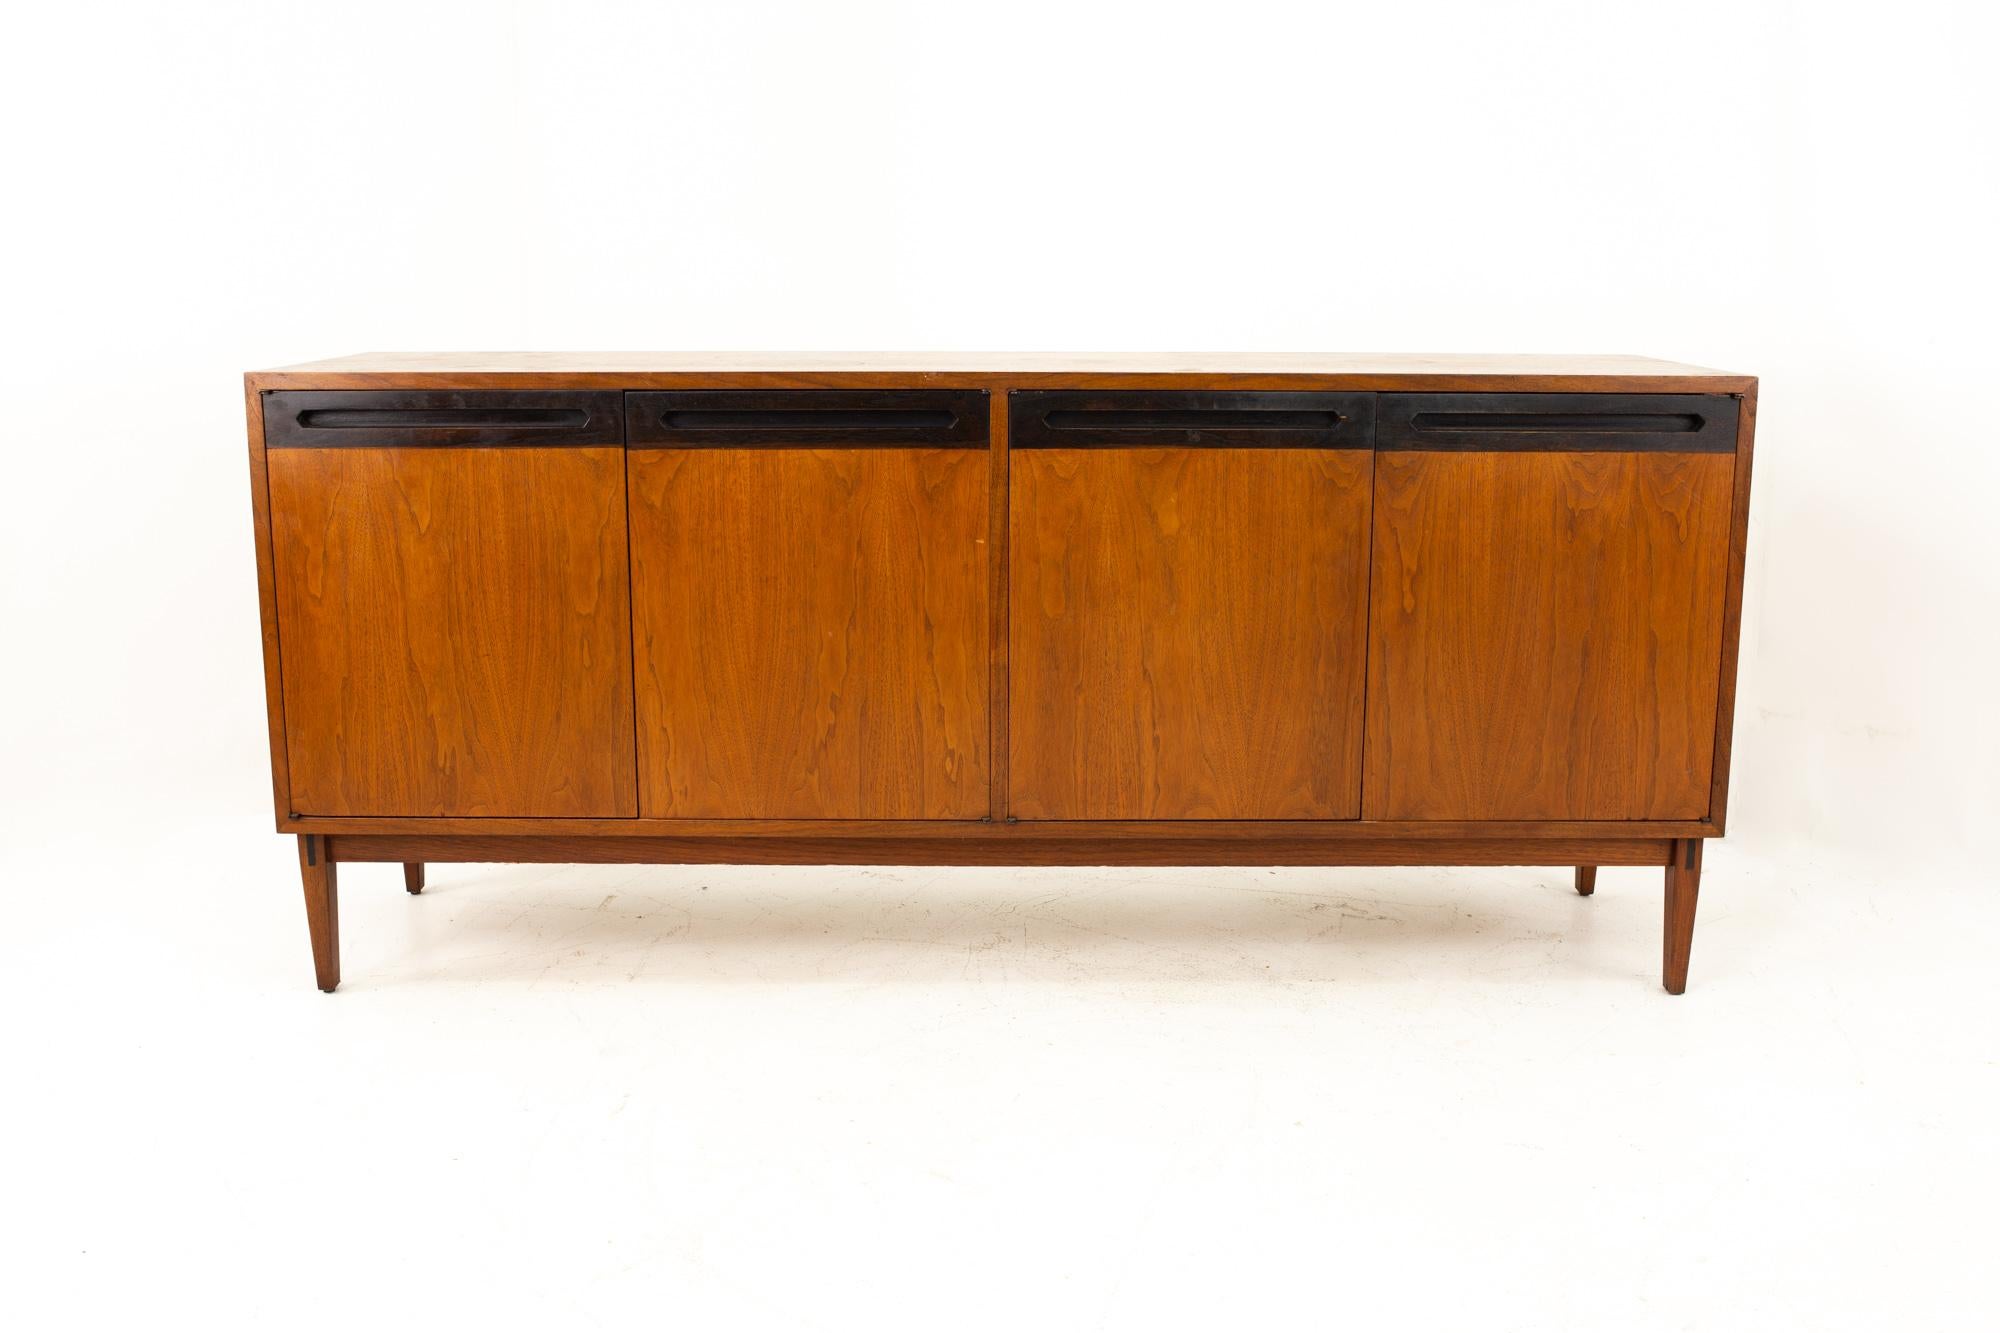 Paul McCobb for Calvin Group Mid Century credenza

Credenza measures: 66.5 wide x 18 deep x 29 high

This price includes getting this piece in what we call restored vintage condition. That means the piece is permanently fixed upon purchase so it’s